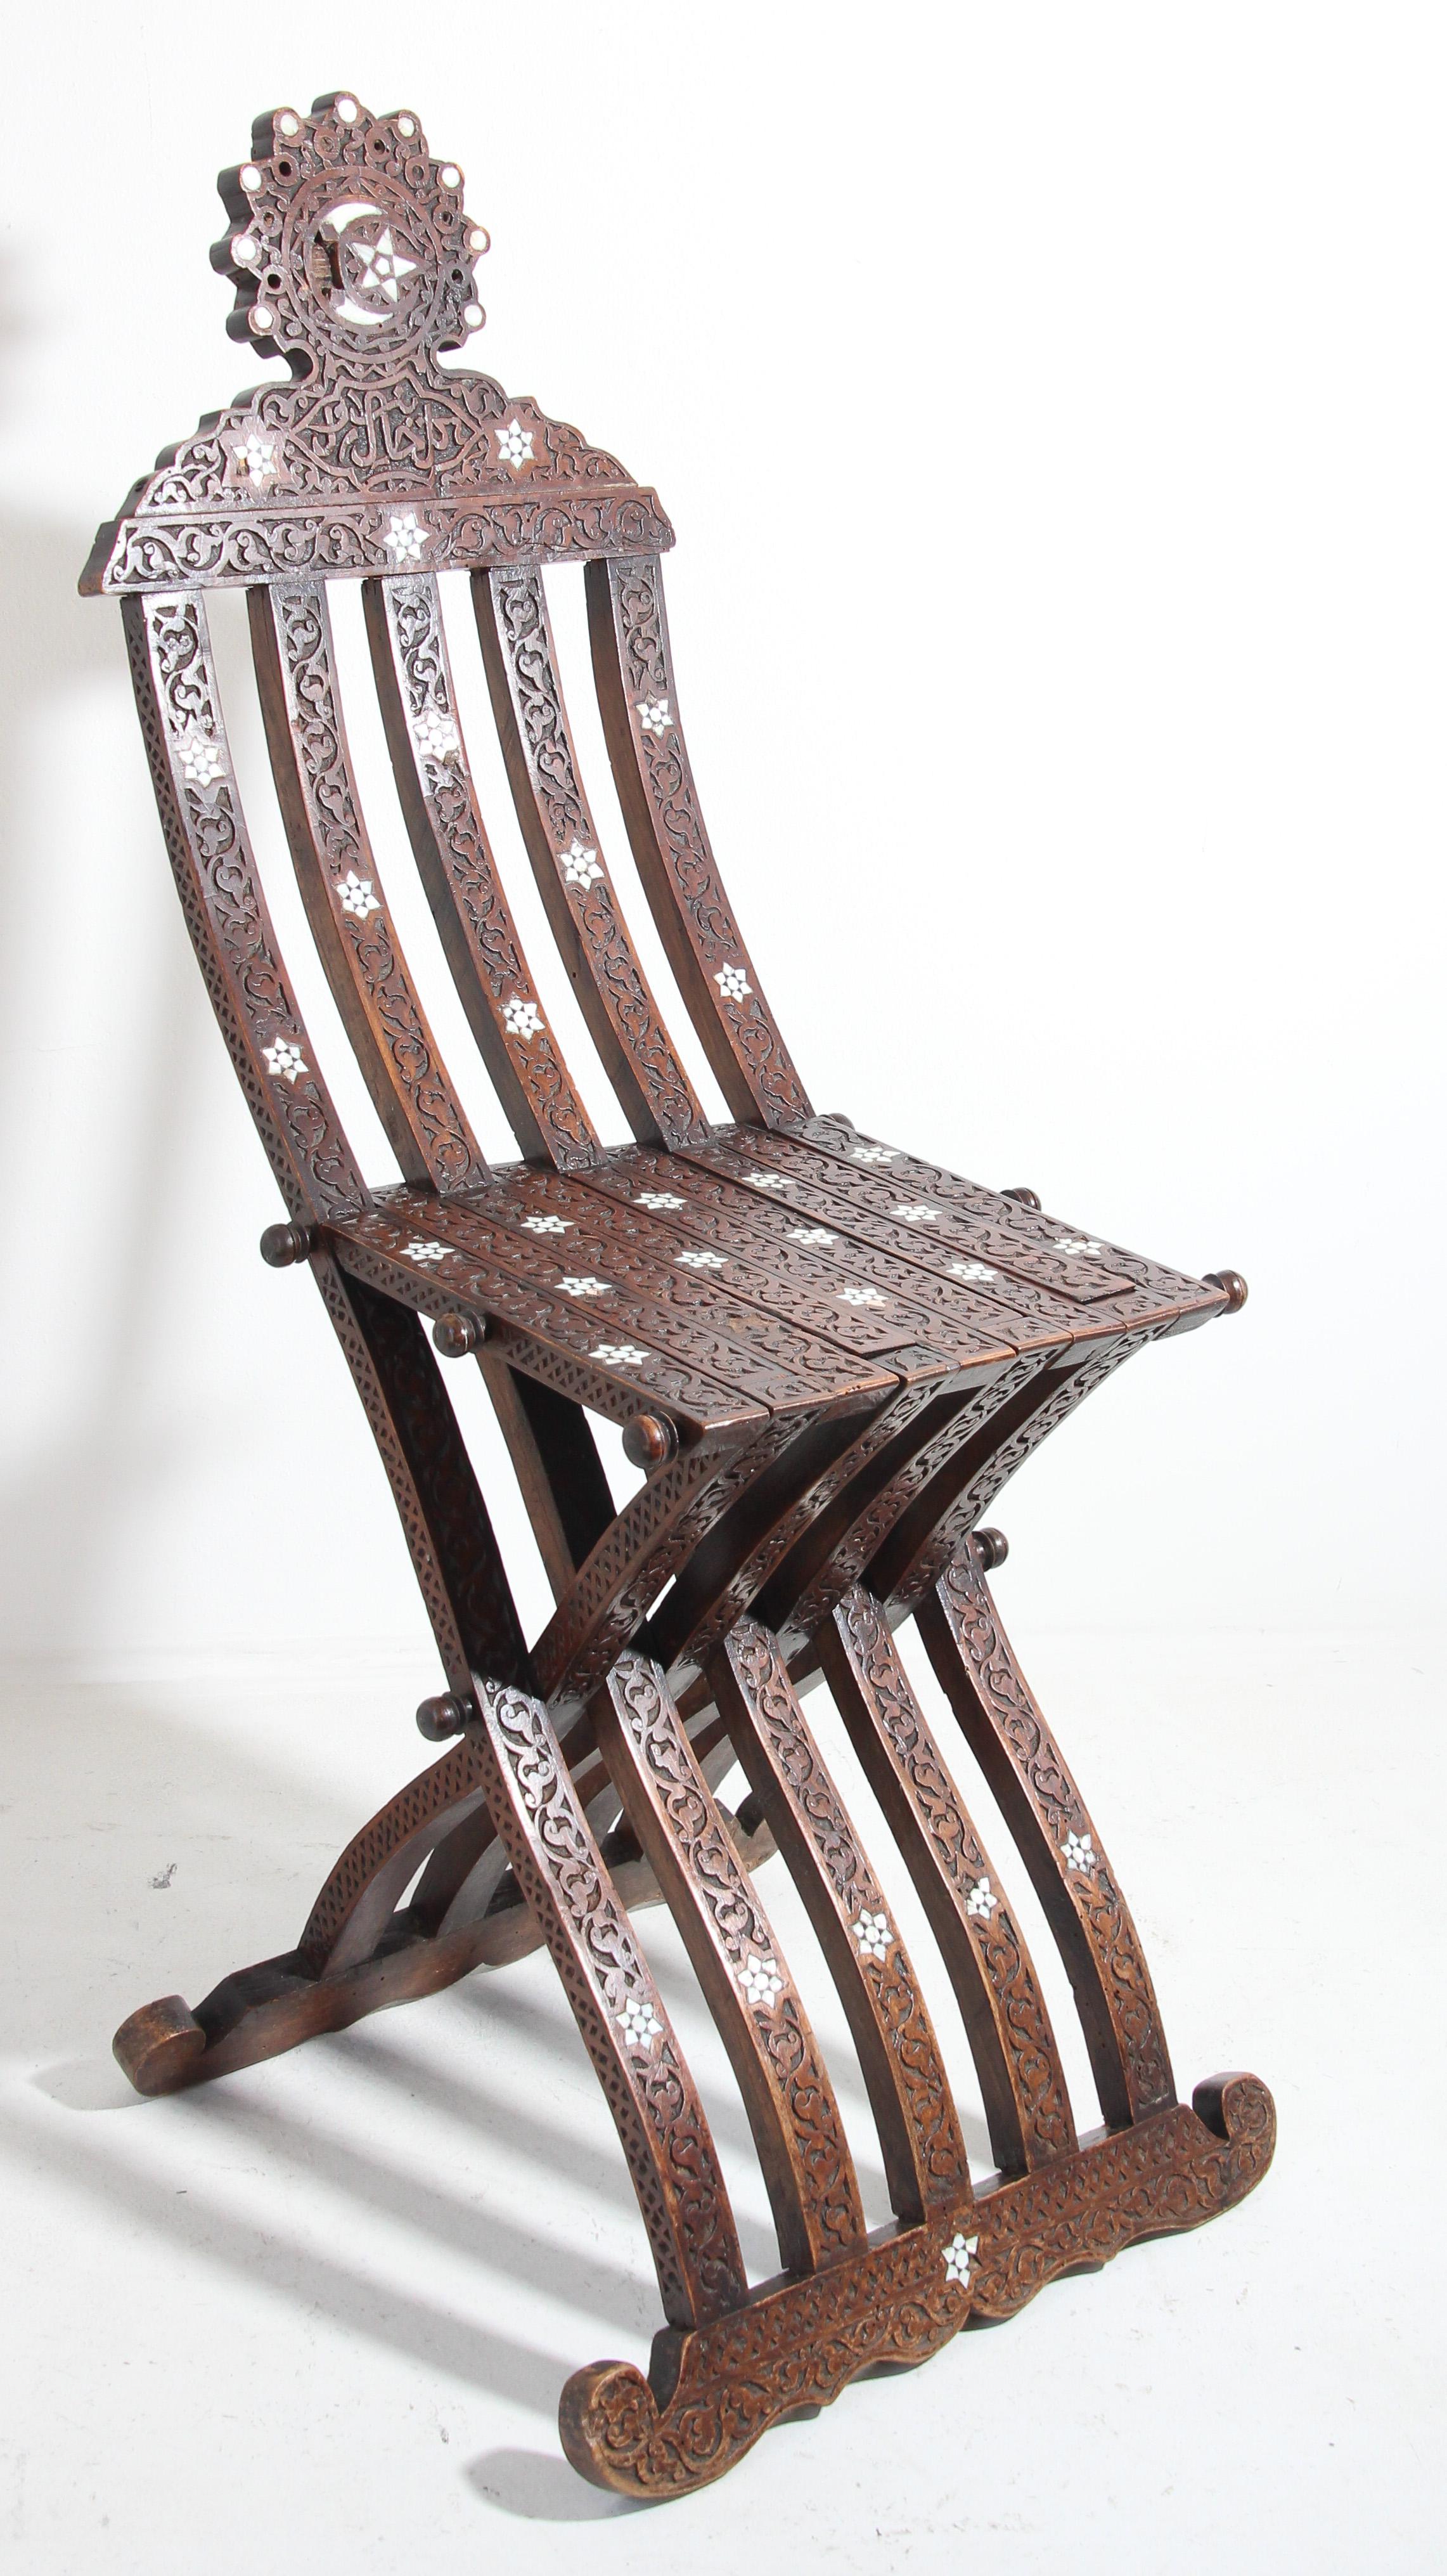 Antique Middle Eastern Moorish walnut wood folding chair with intricate foliate carving and mother of pearl, shell inlays.
Moroccan Moorish style folding chair inlaid with mother of pearl stars designs, hand carved with Arabic calligraphy script